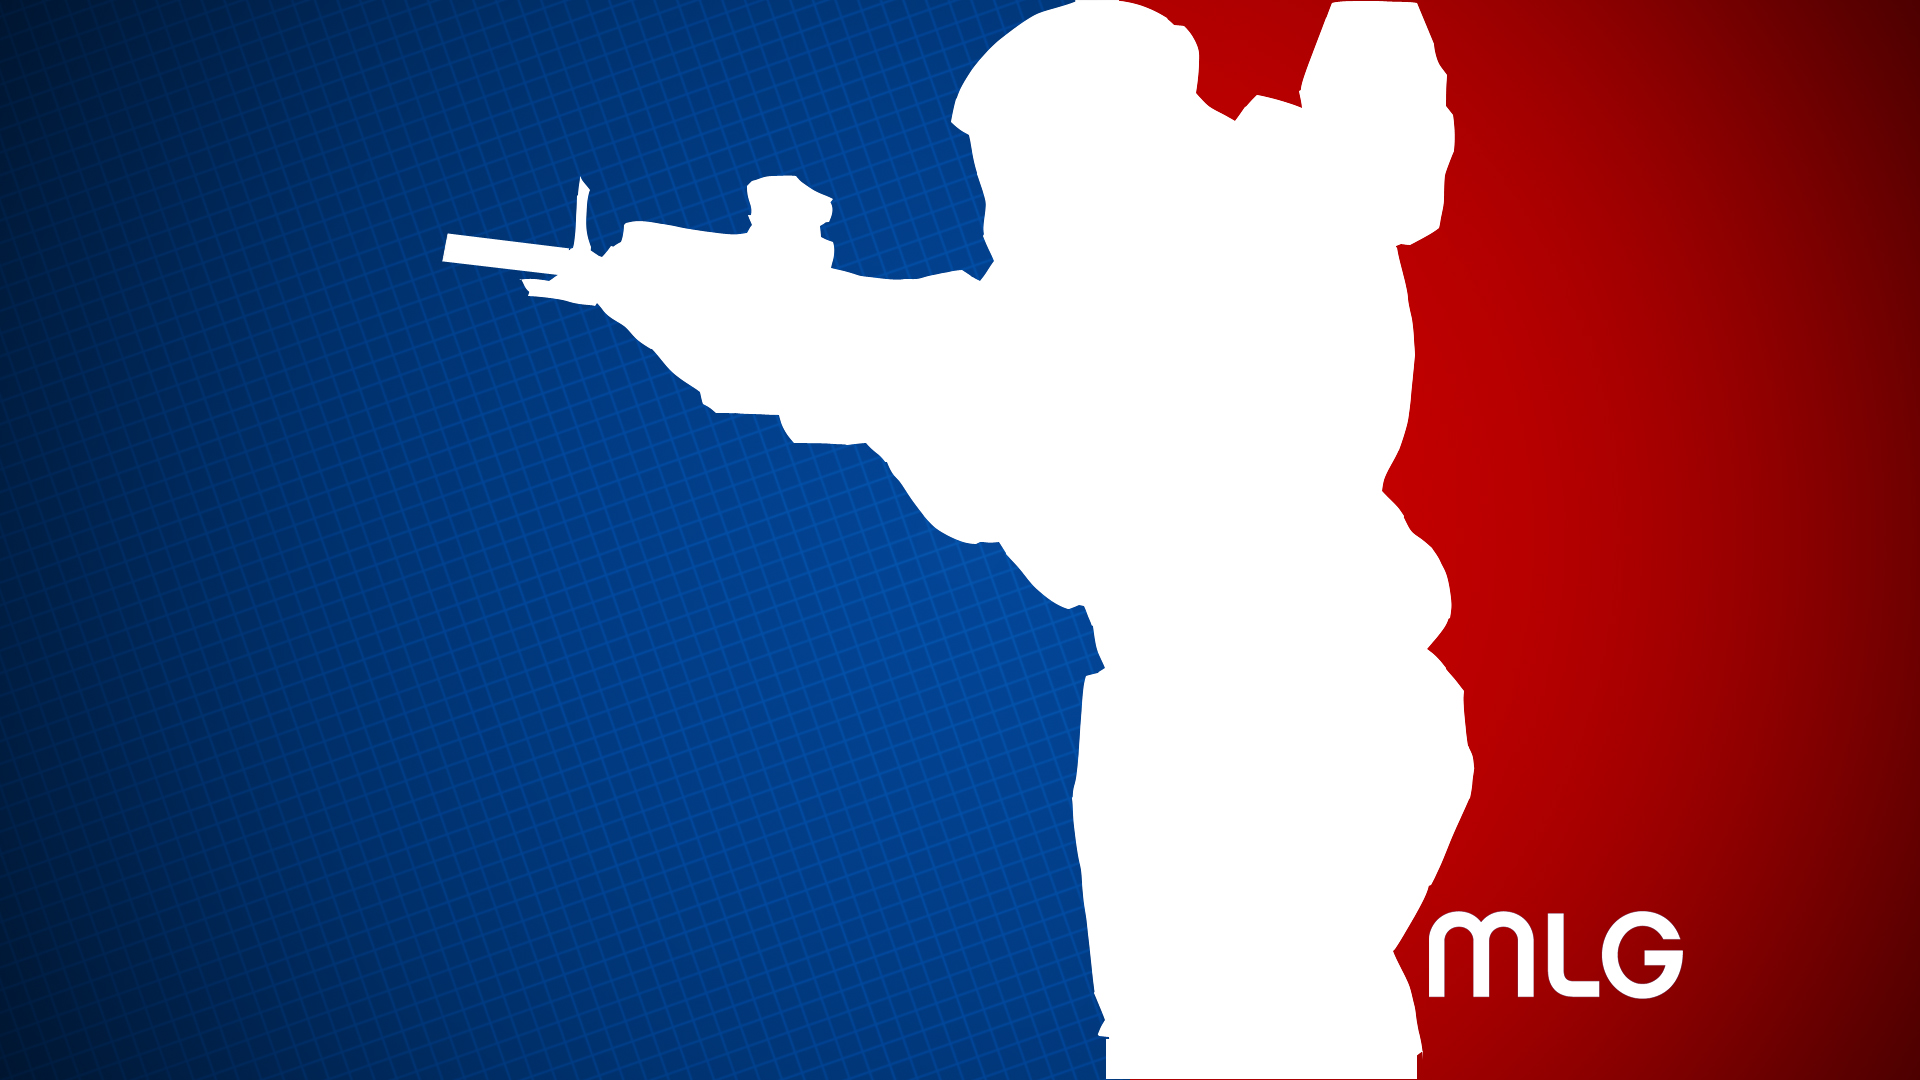 Mlg Announces Board Appointment Of Houston Rockets Gm Daryl Morey